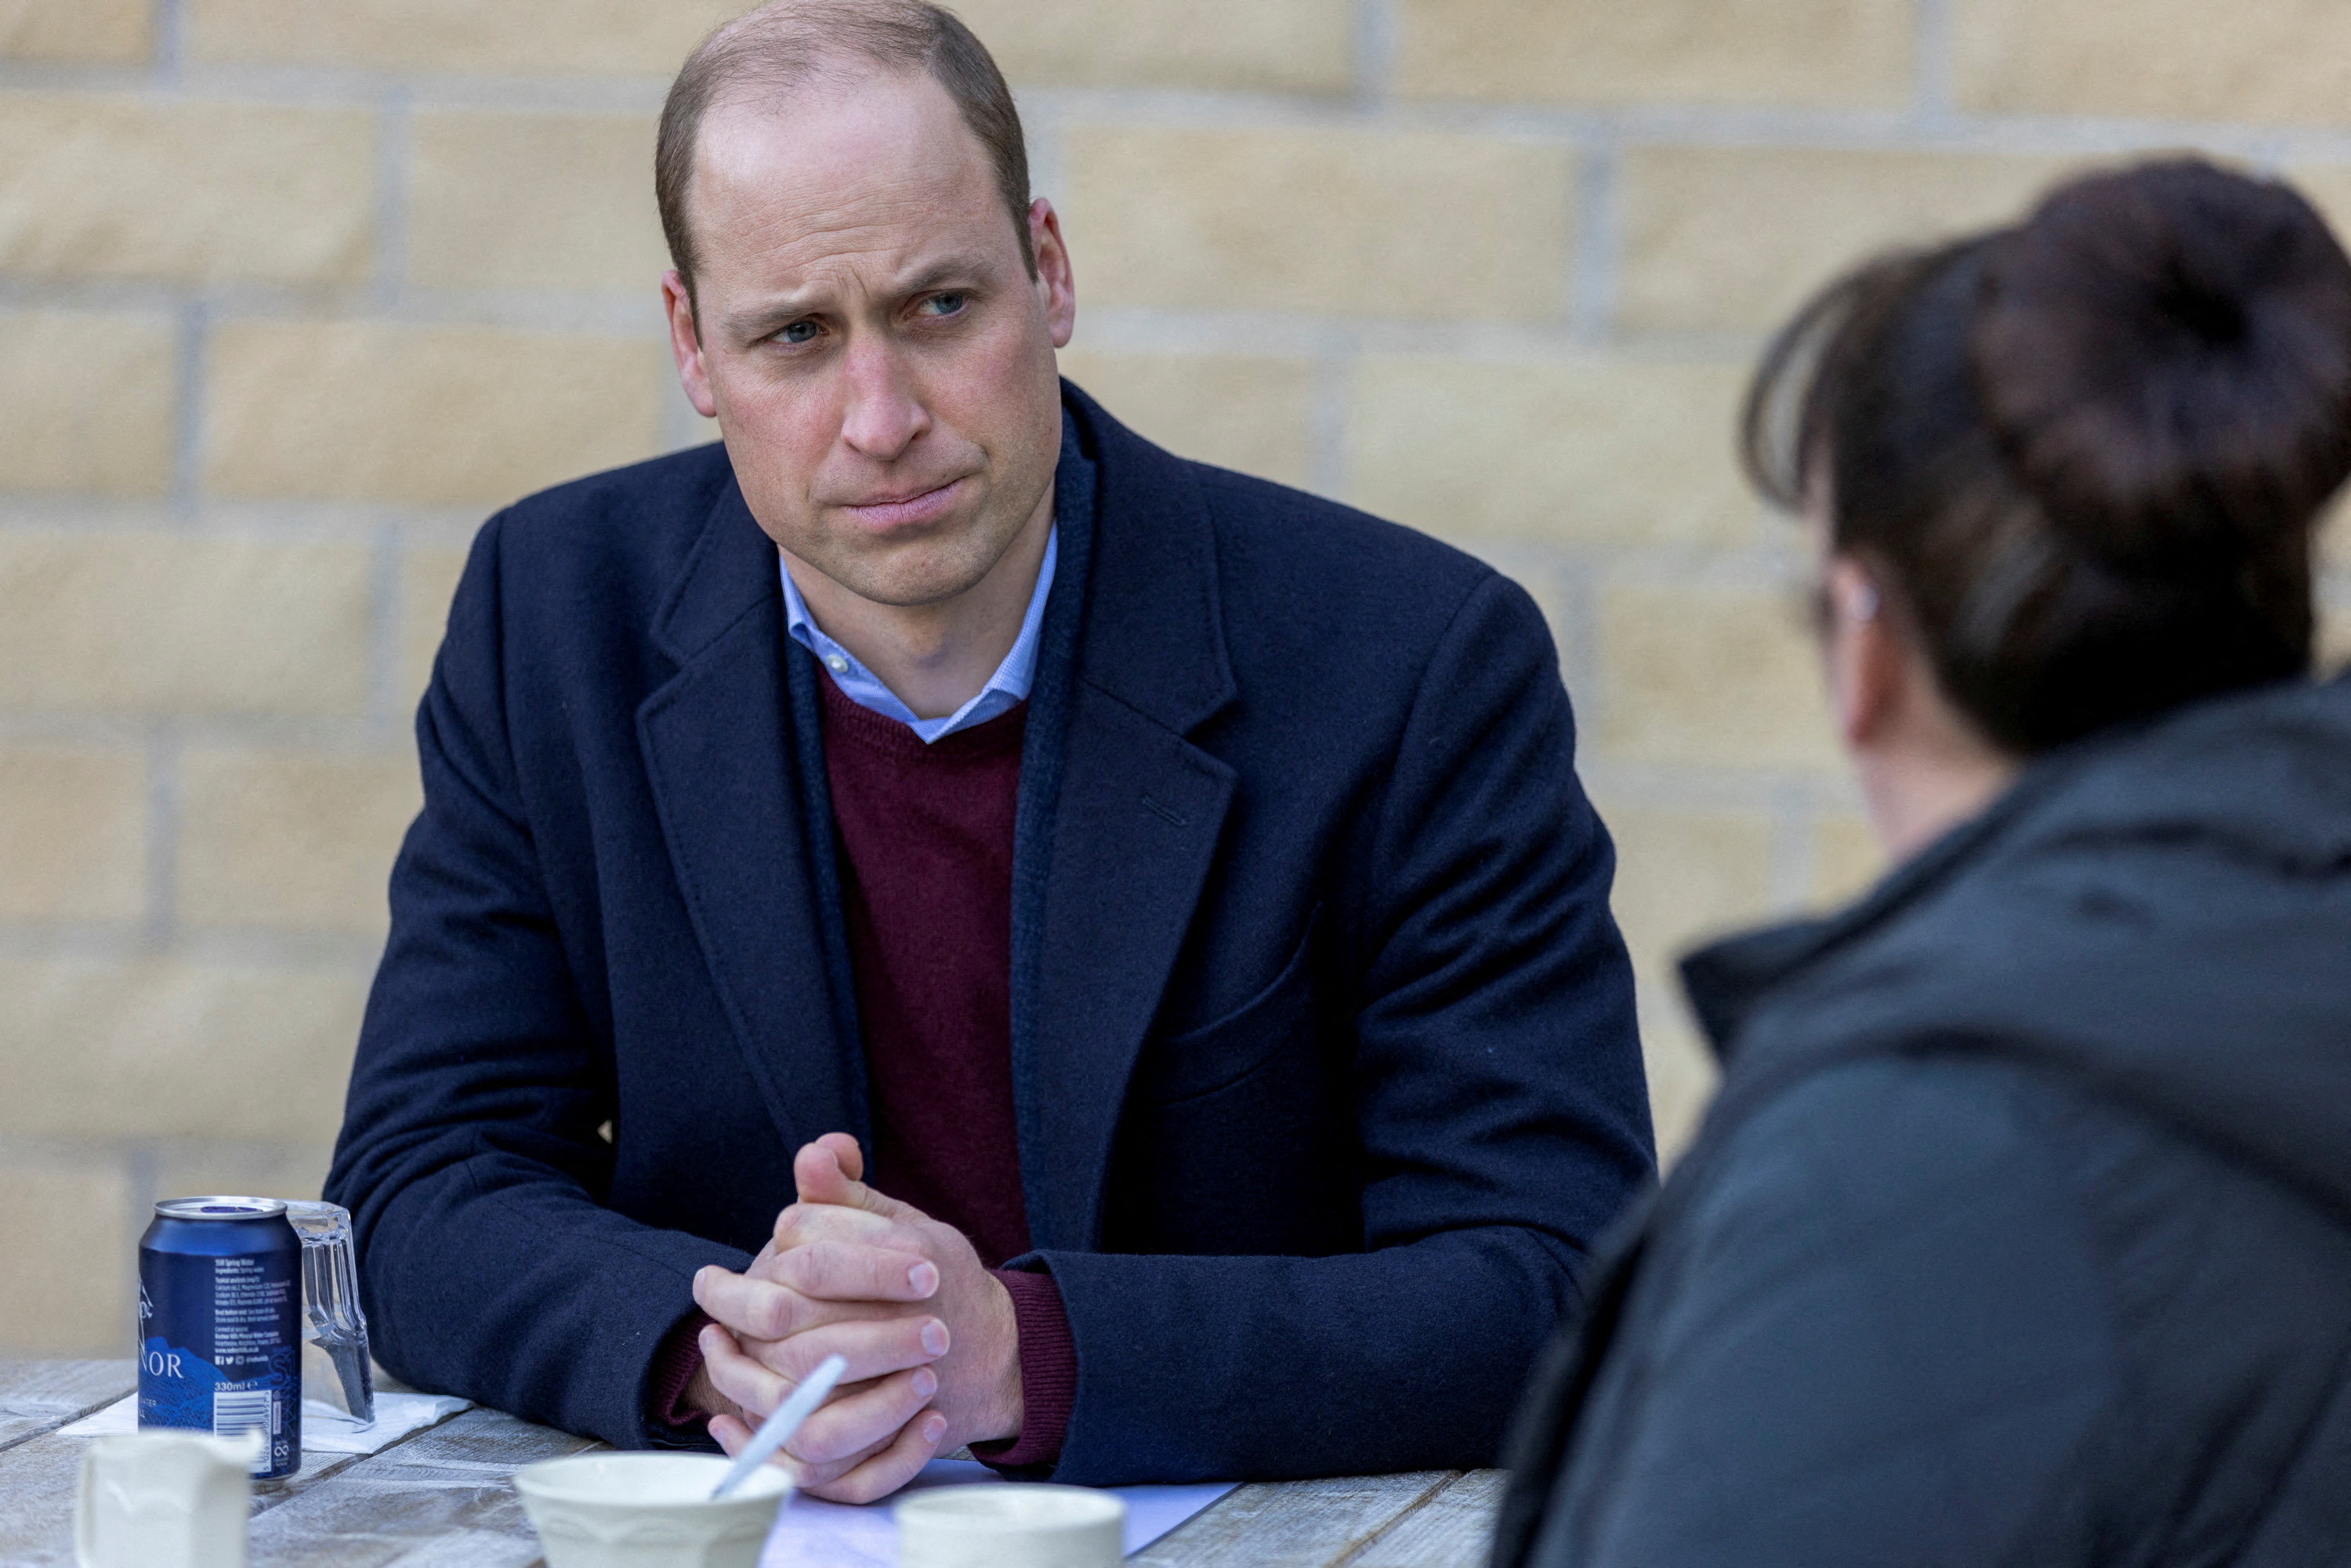 Britain's Prince William visits Clitheroe